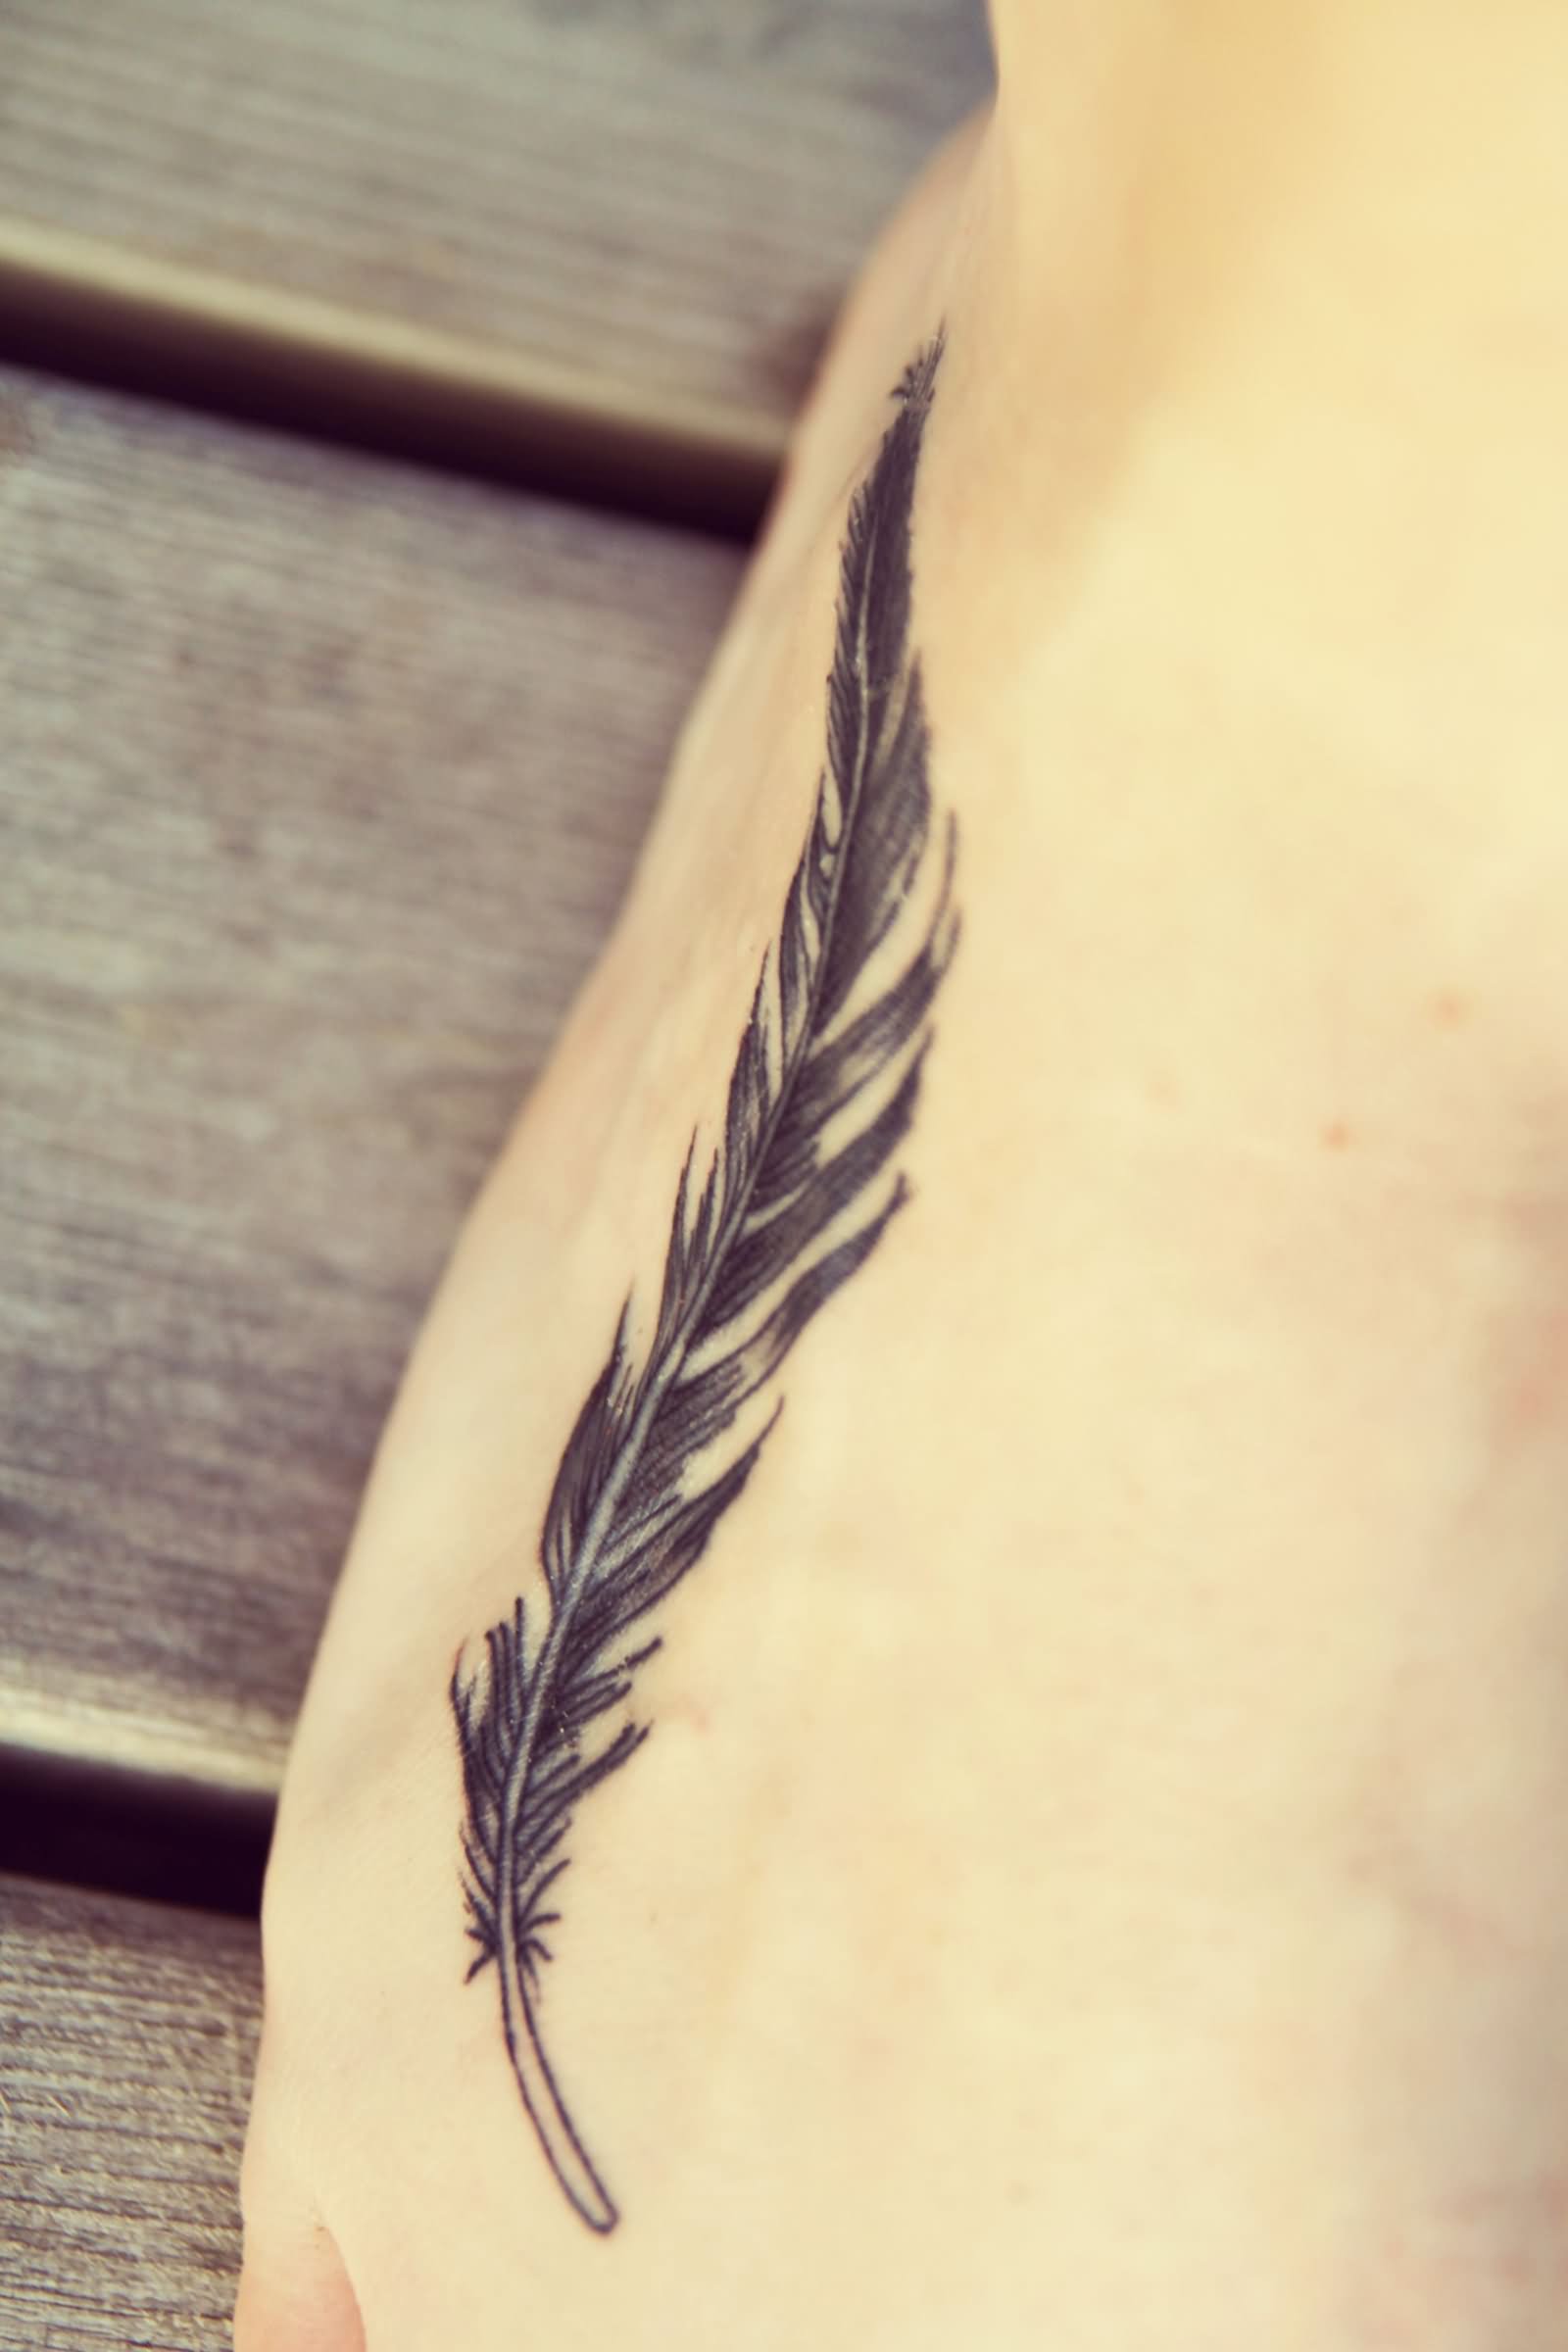 Black Feather Tattoo On Right Foot